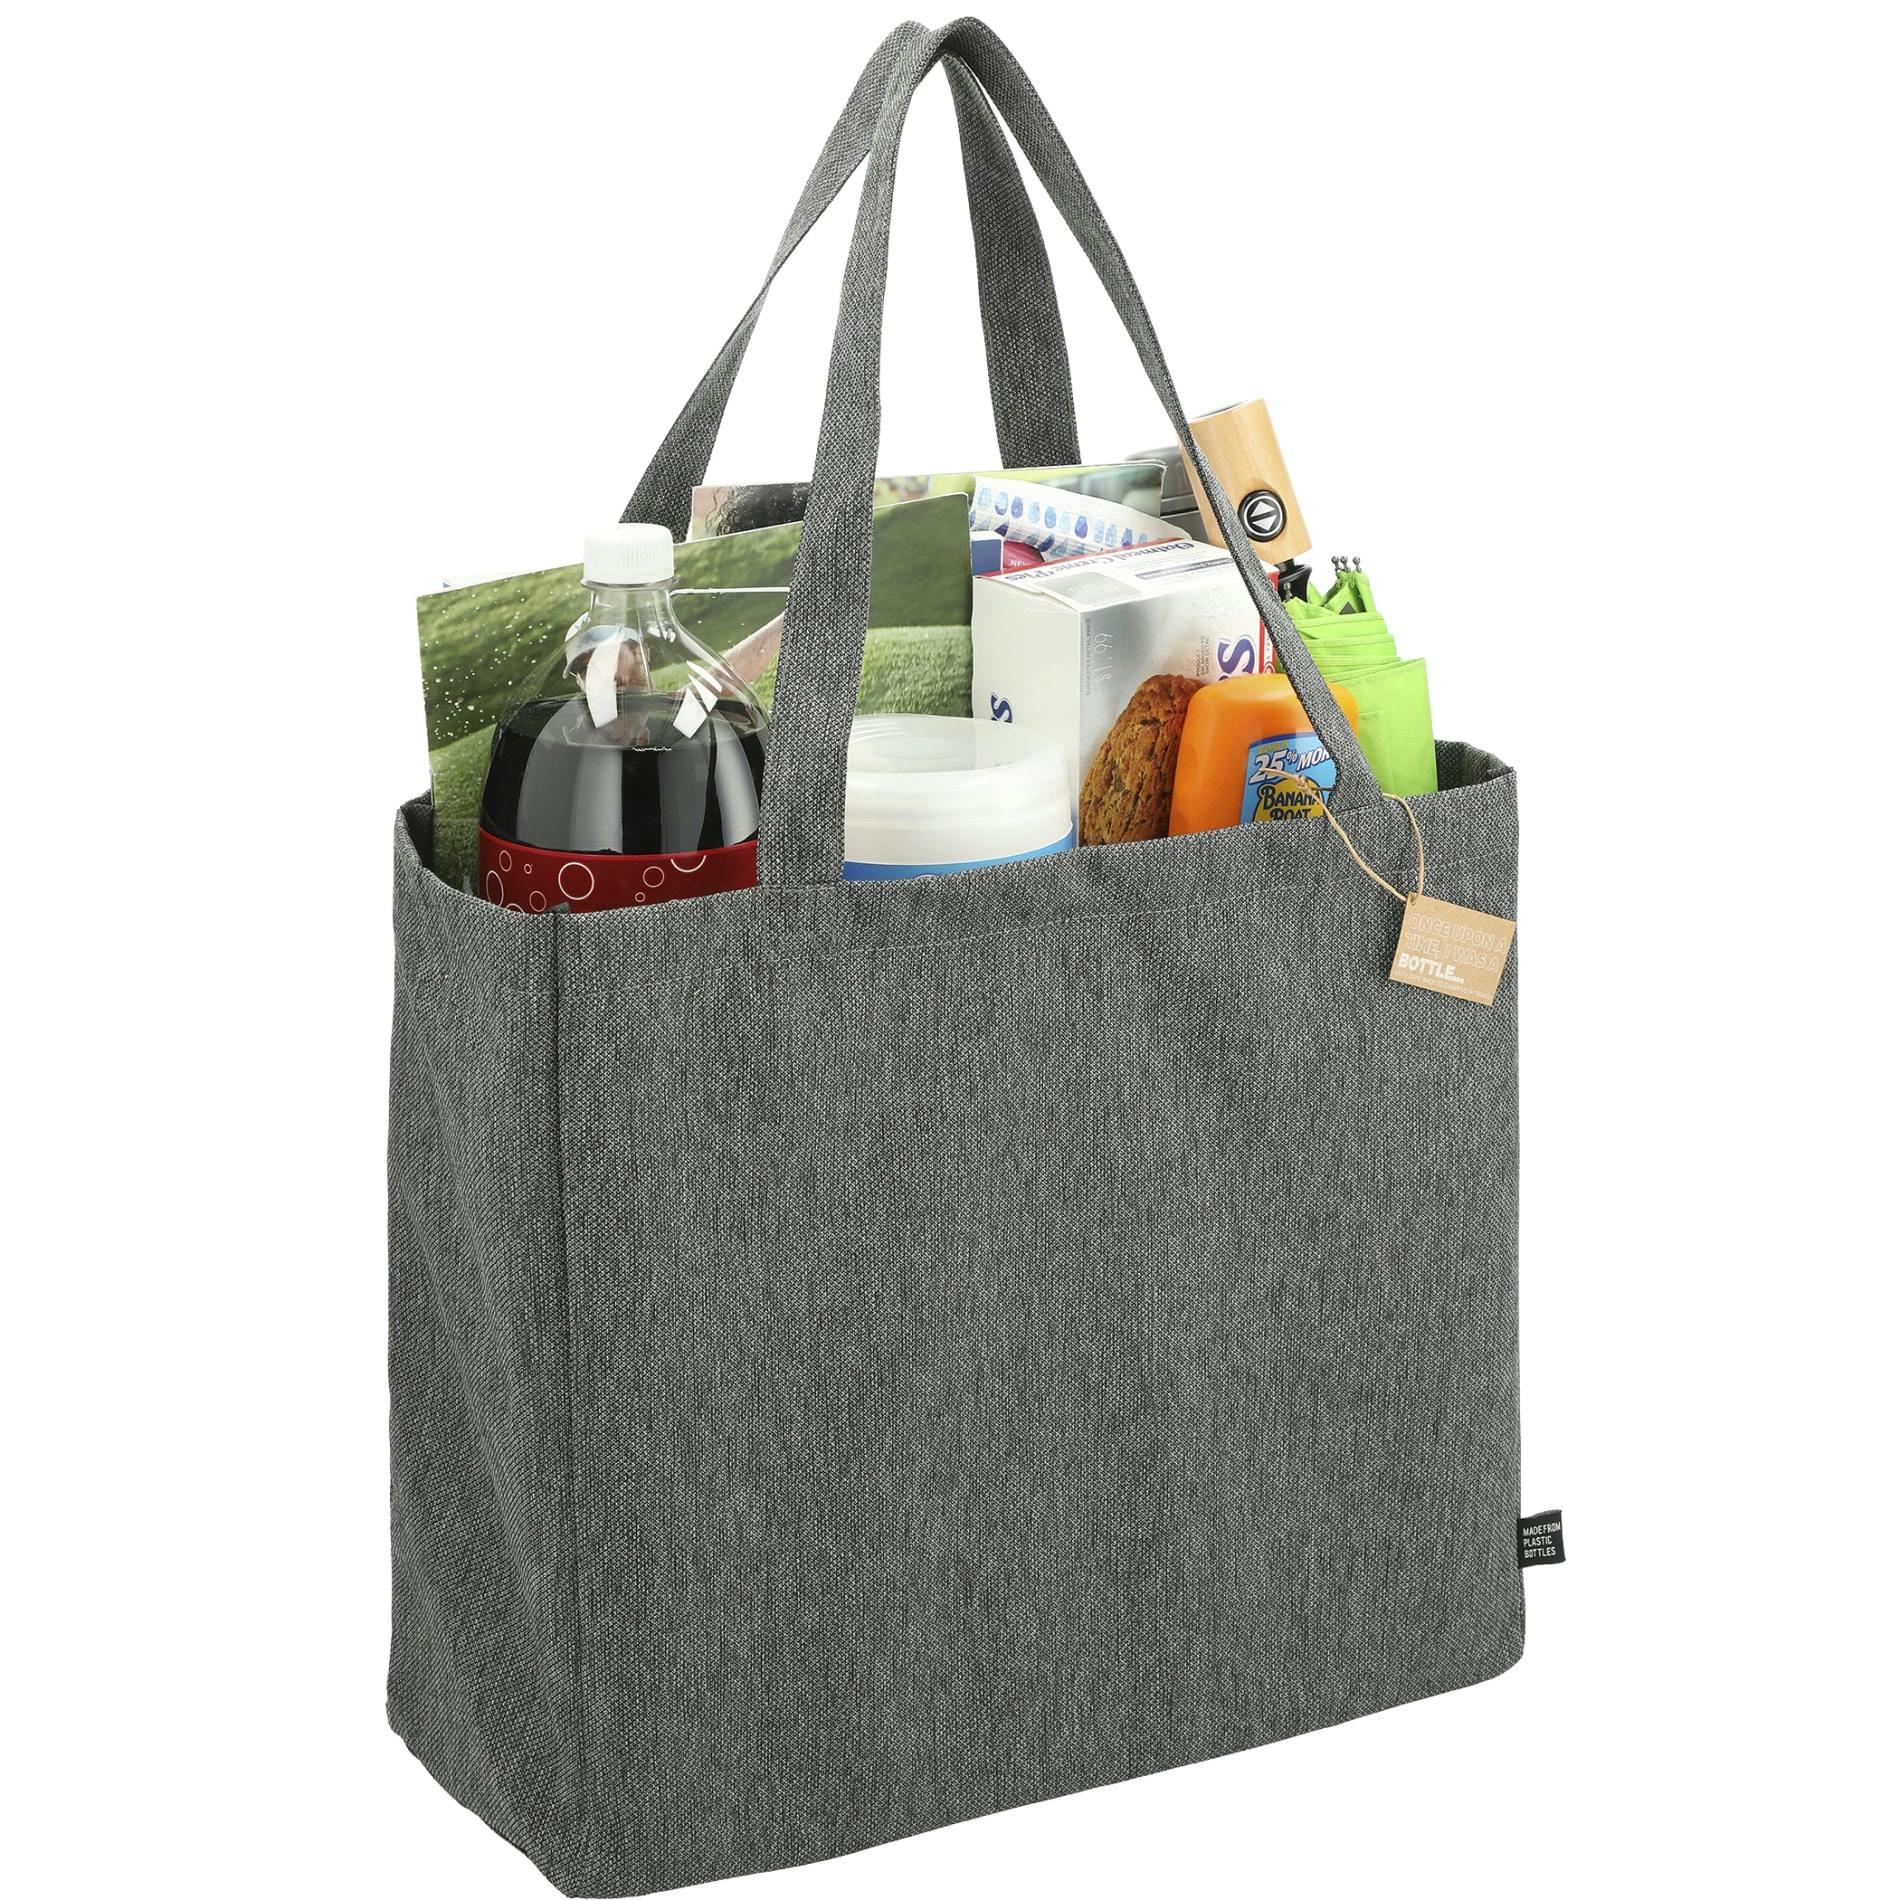 Vila Recycled All-Purpose Tote - additional Image 4